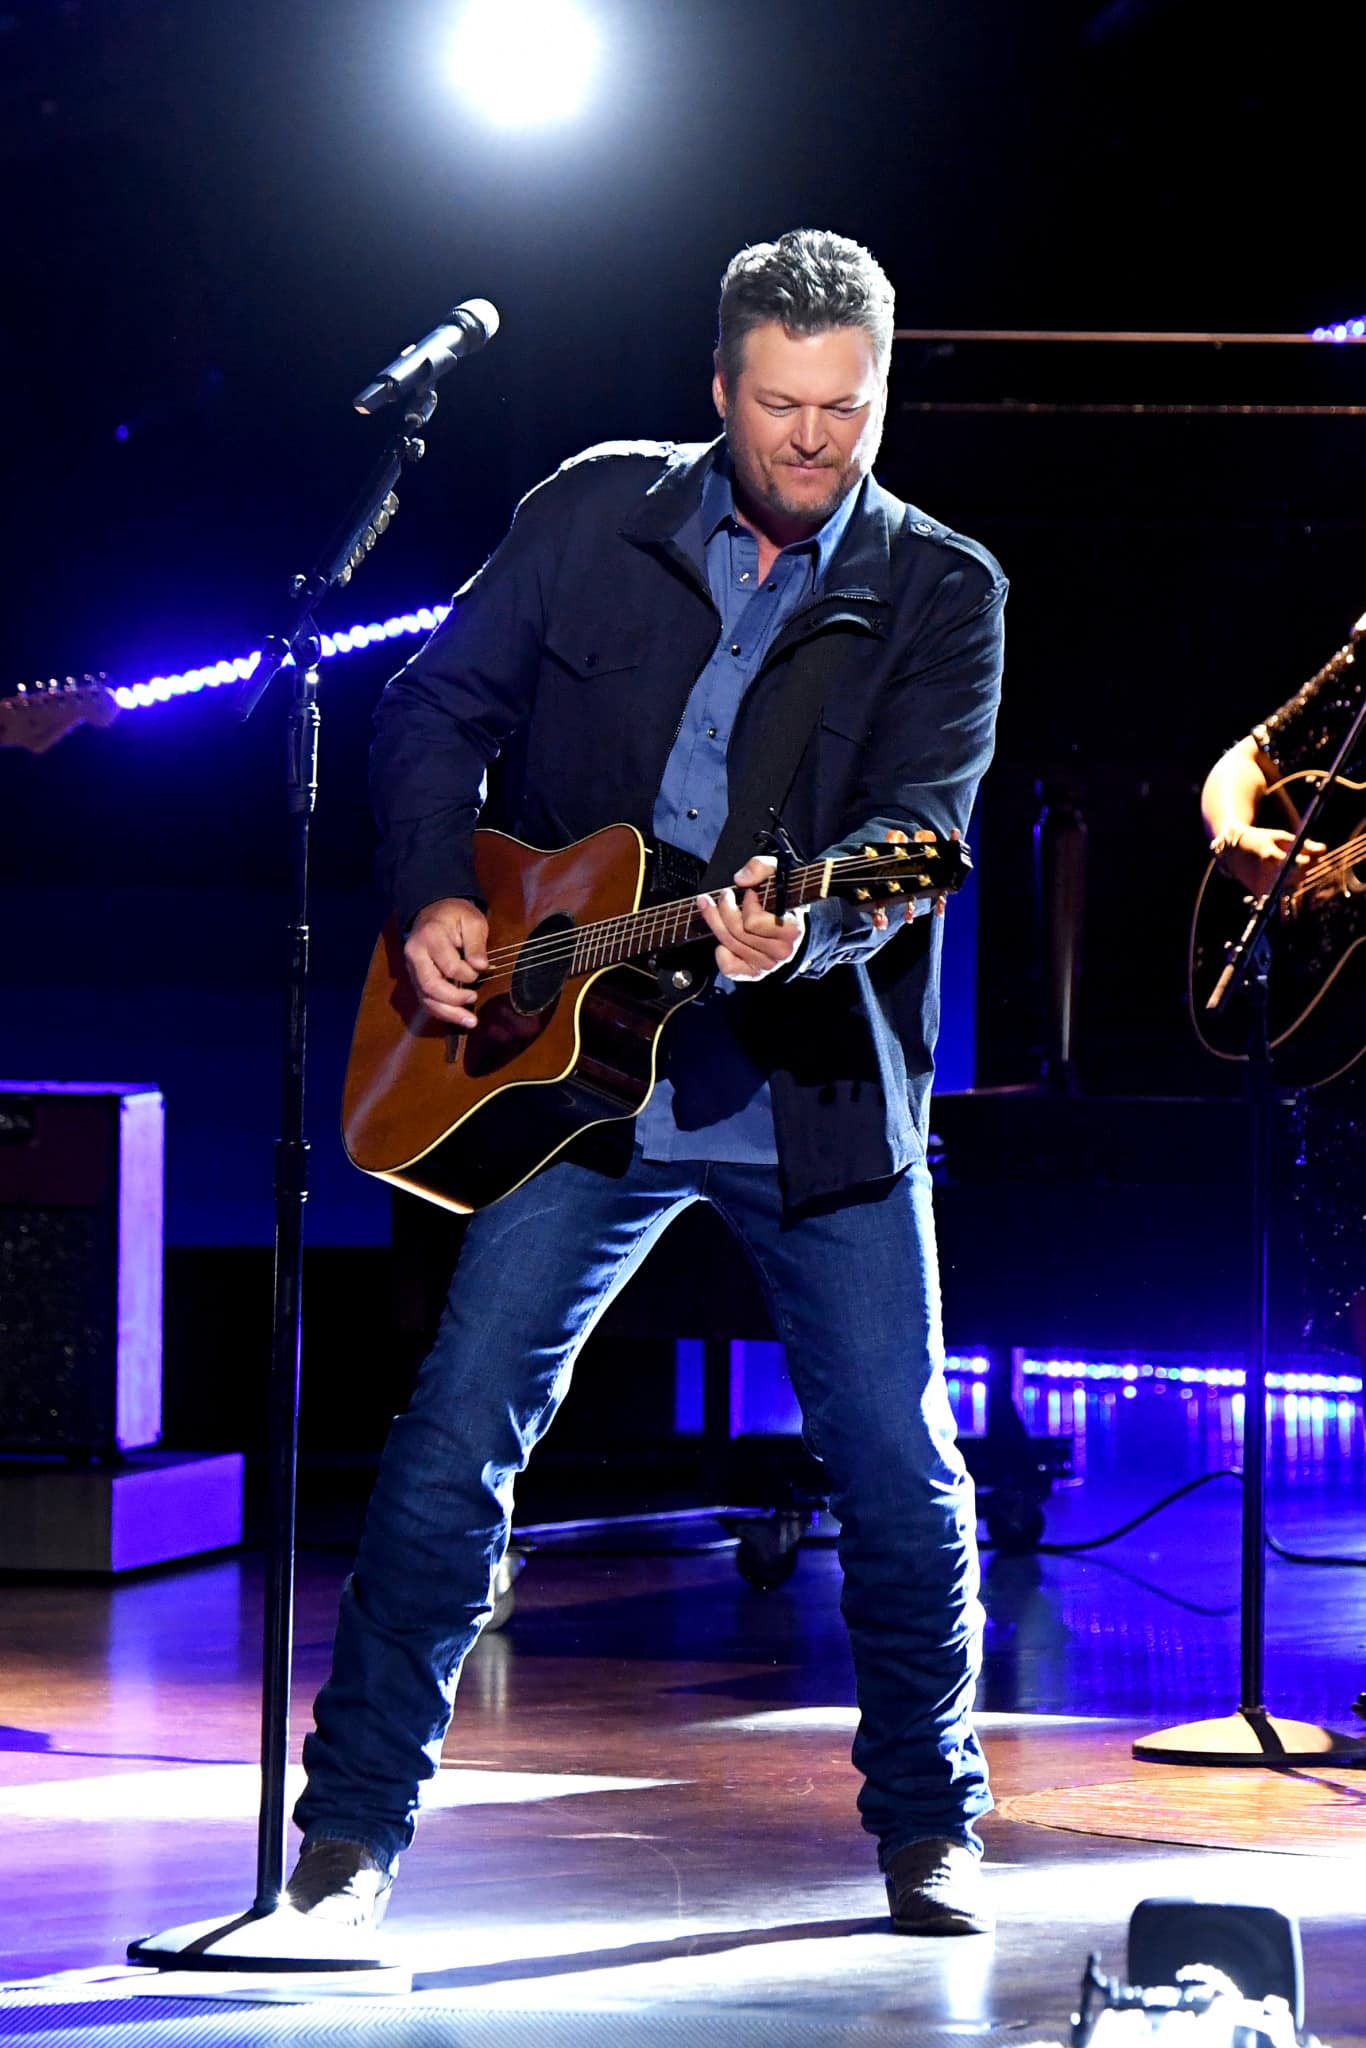 NASHVILLE, TENNESSEE - APRIL 18: In this image released on April 18, Blake Shelton performs onstage at the 56th Academy of Country Music Awards at the Grand Ole Opry on April 18, 2021 in Nashville, Tennessee. (Photo by Kevin Mazur/Getty Images for ACM)